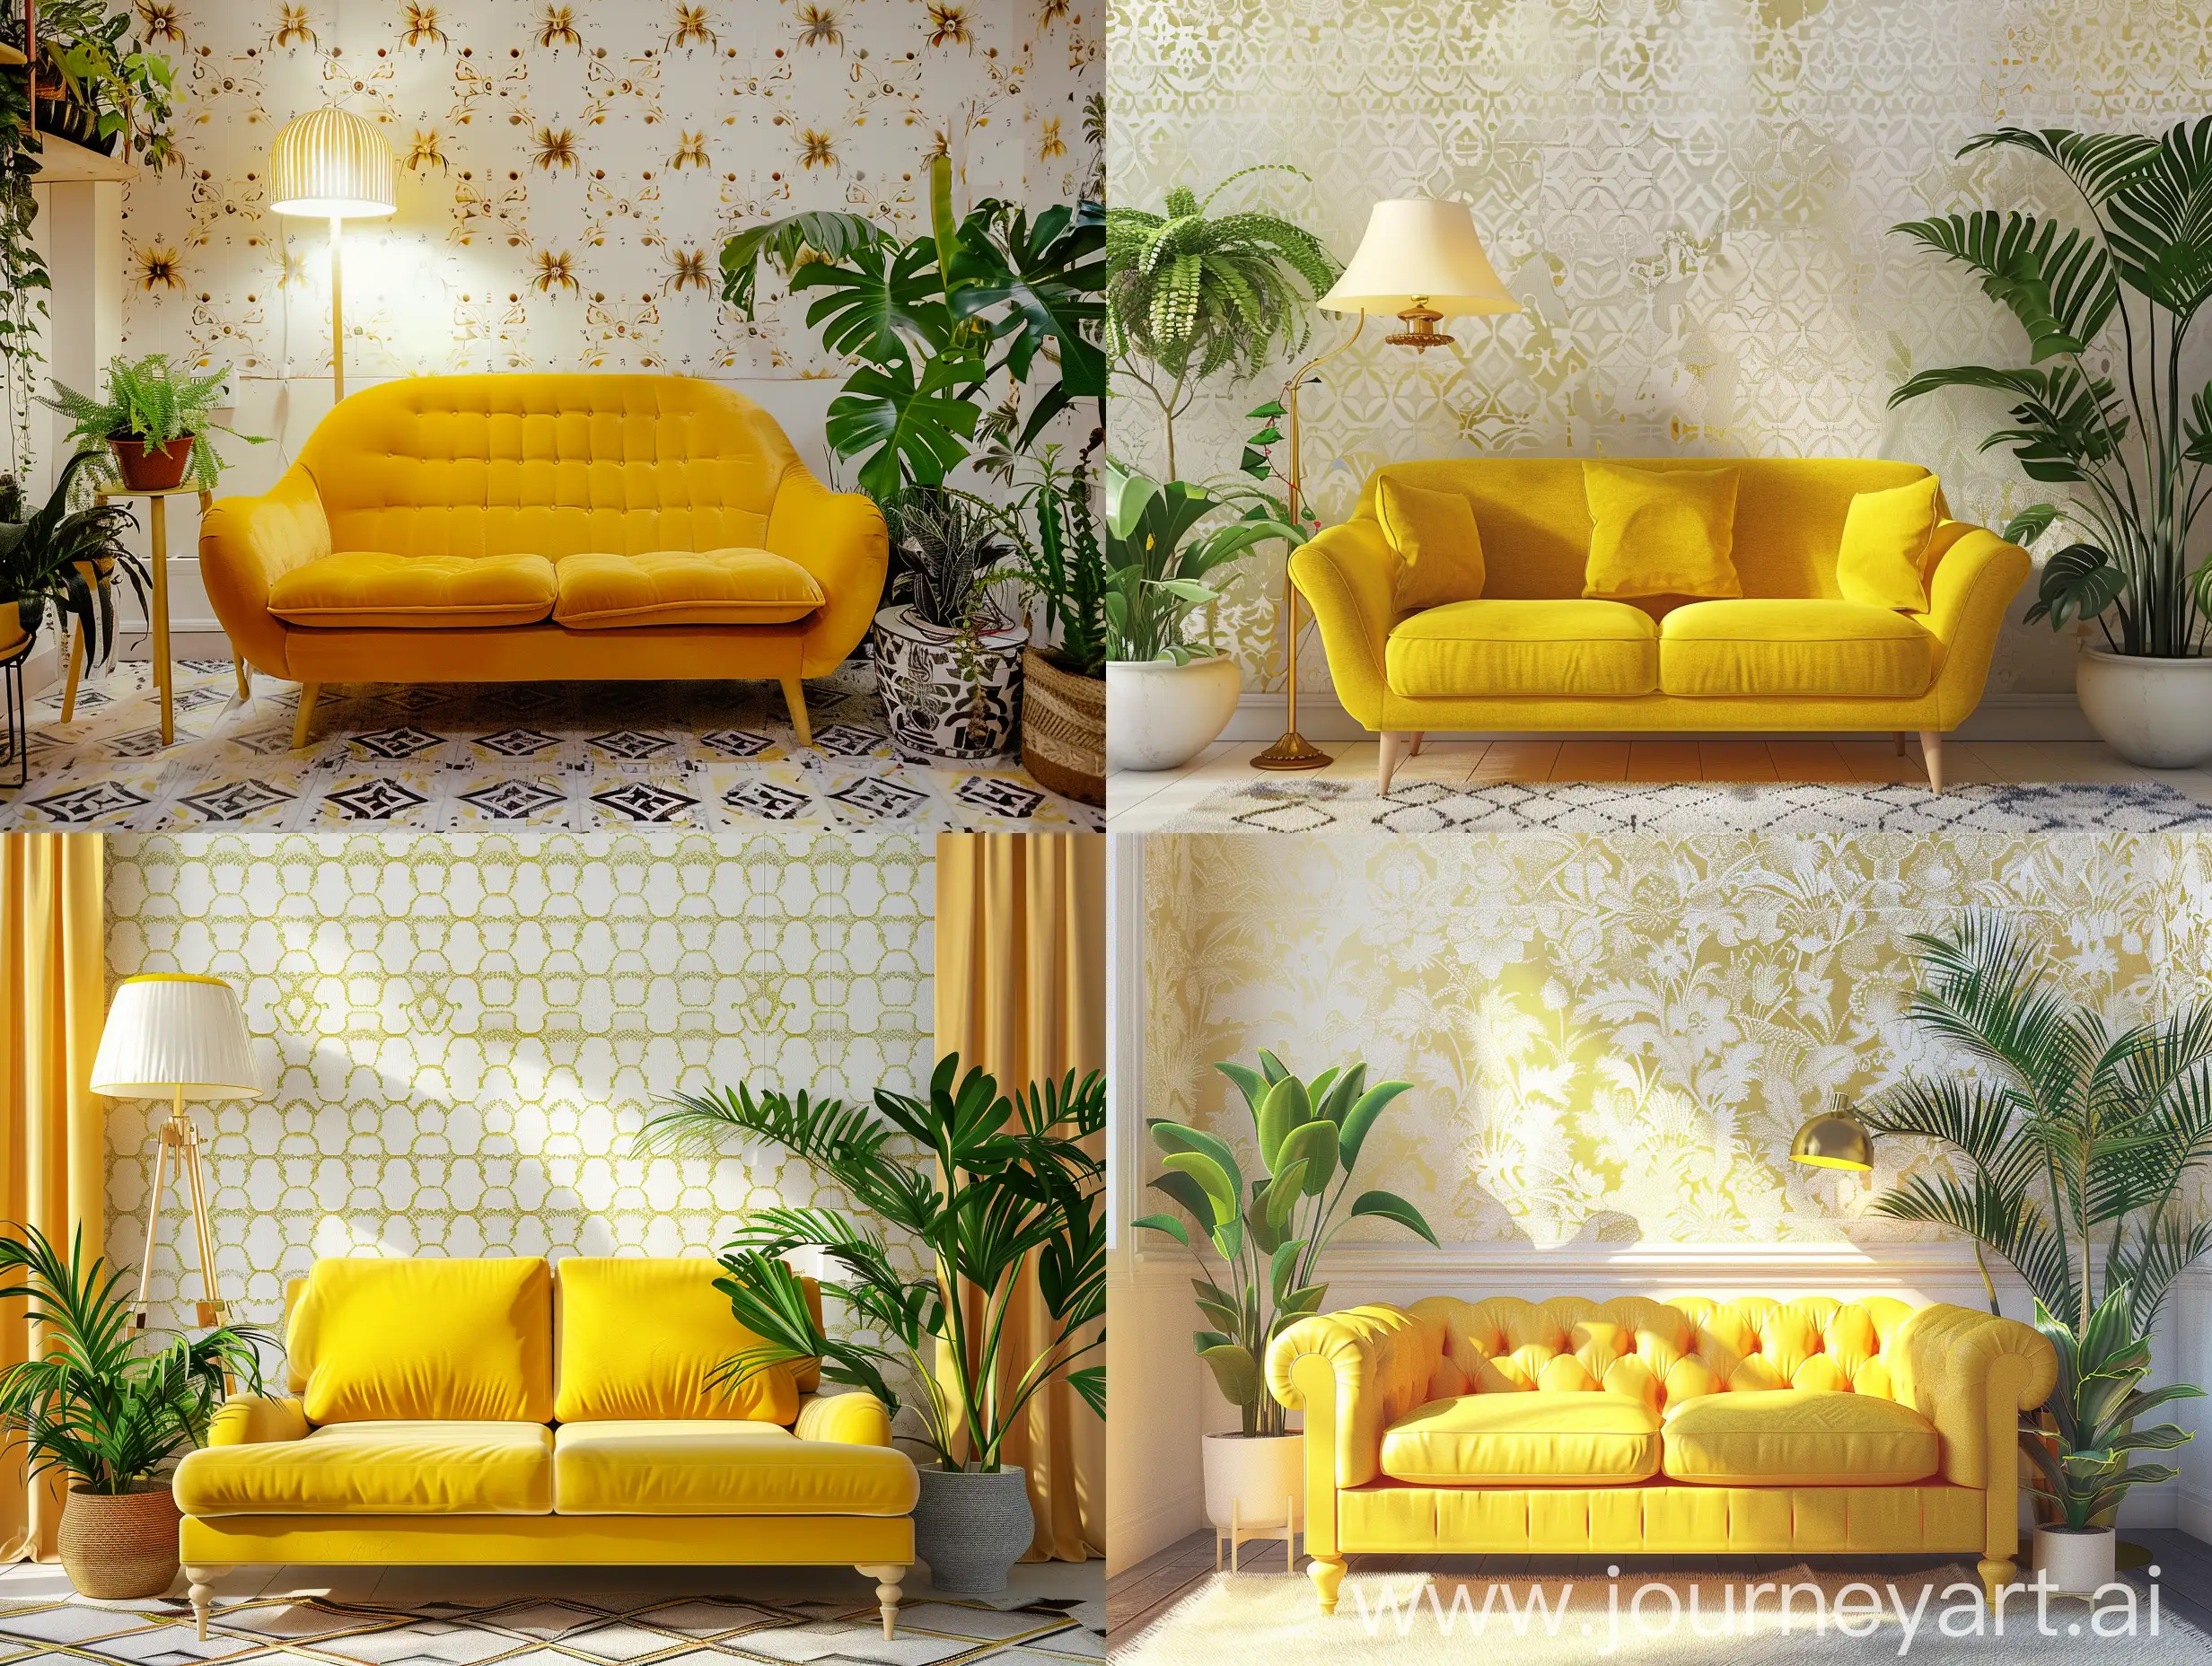 Yellow sofa between plants and lamp in bright living room interior with patterned walls. 